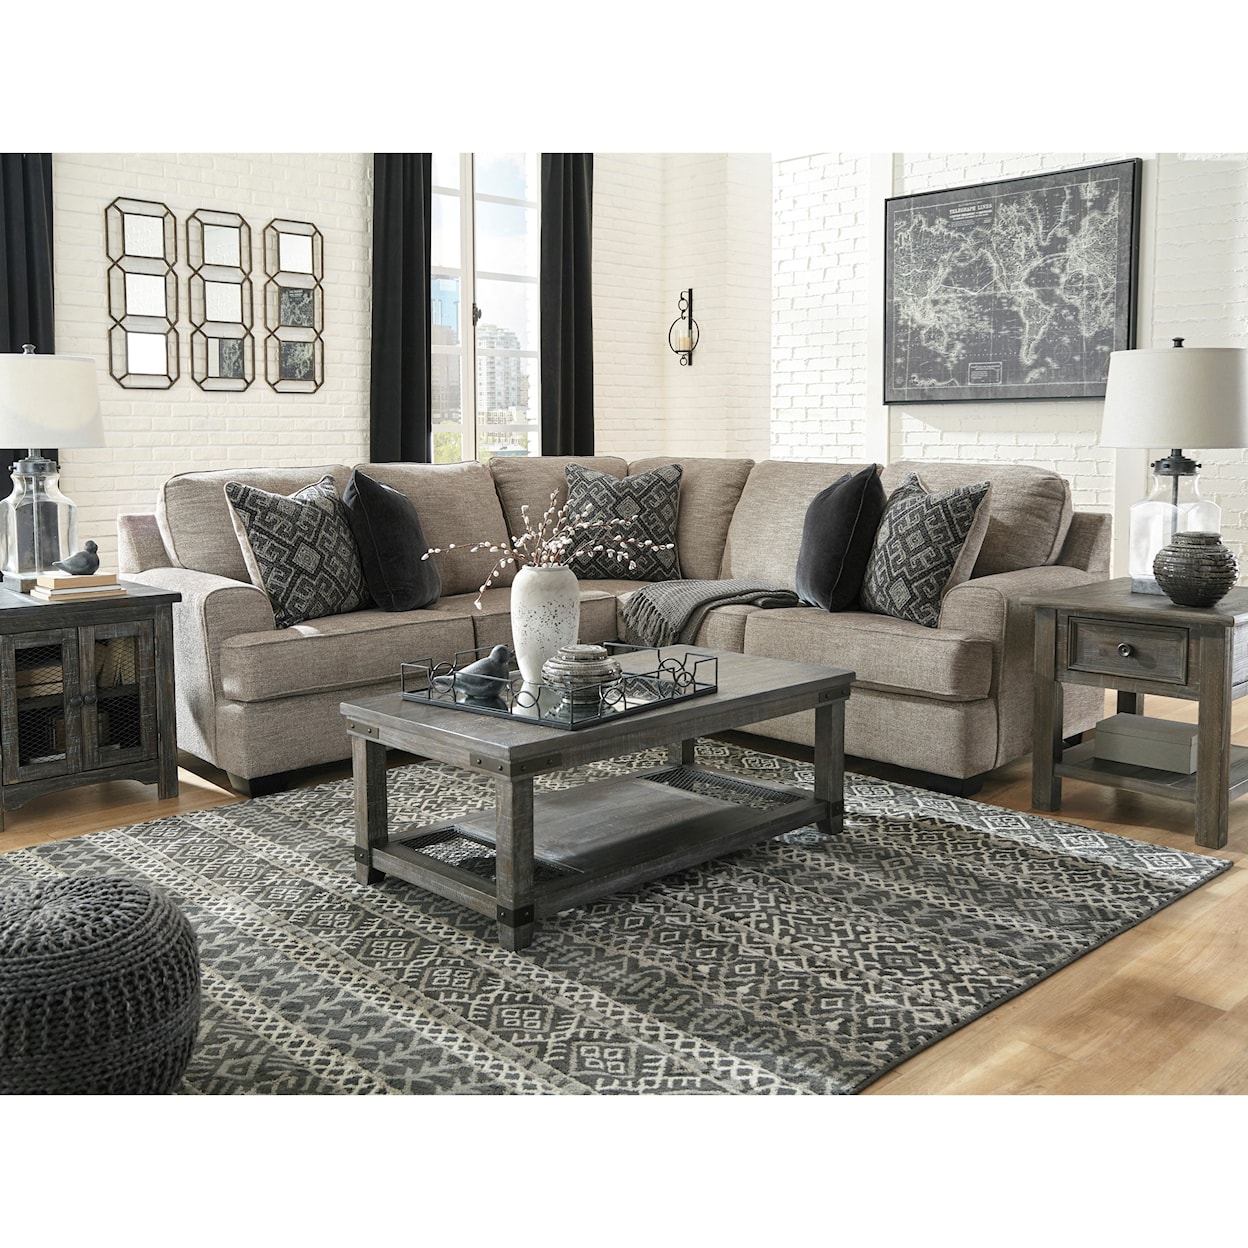 StyleLine Bovarian 2-Piece Sectional